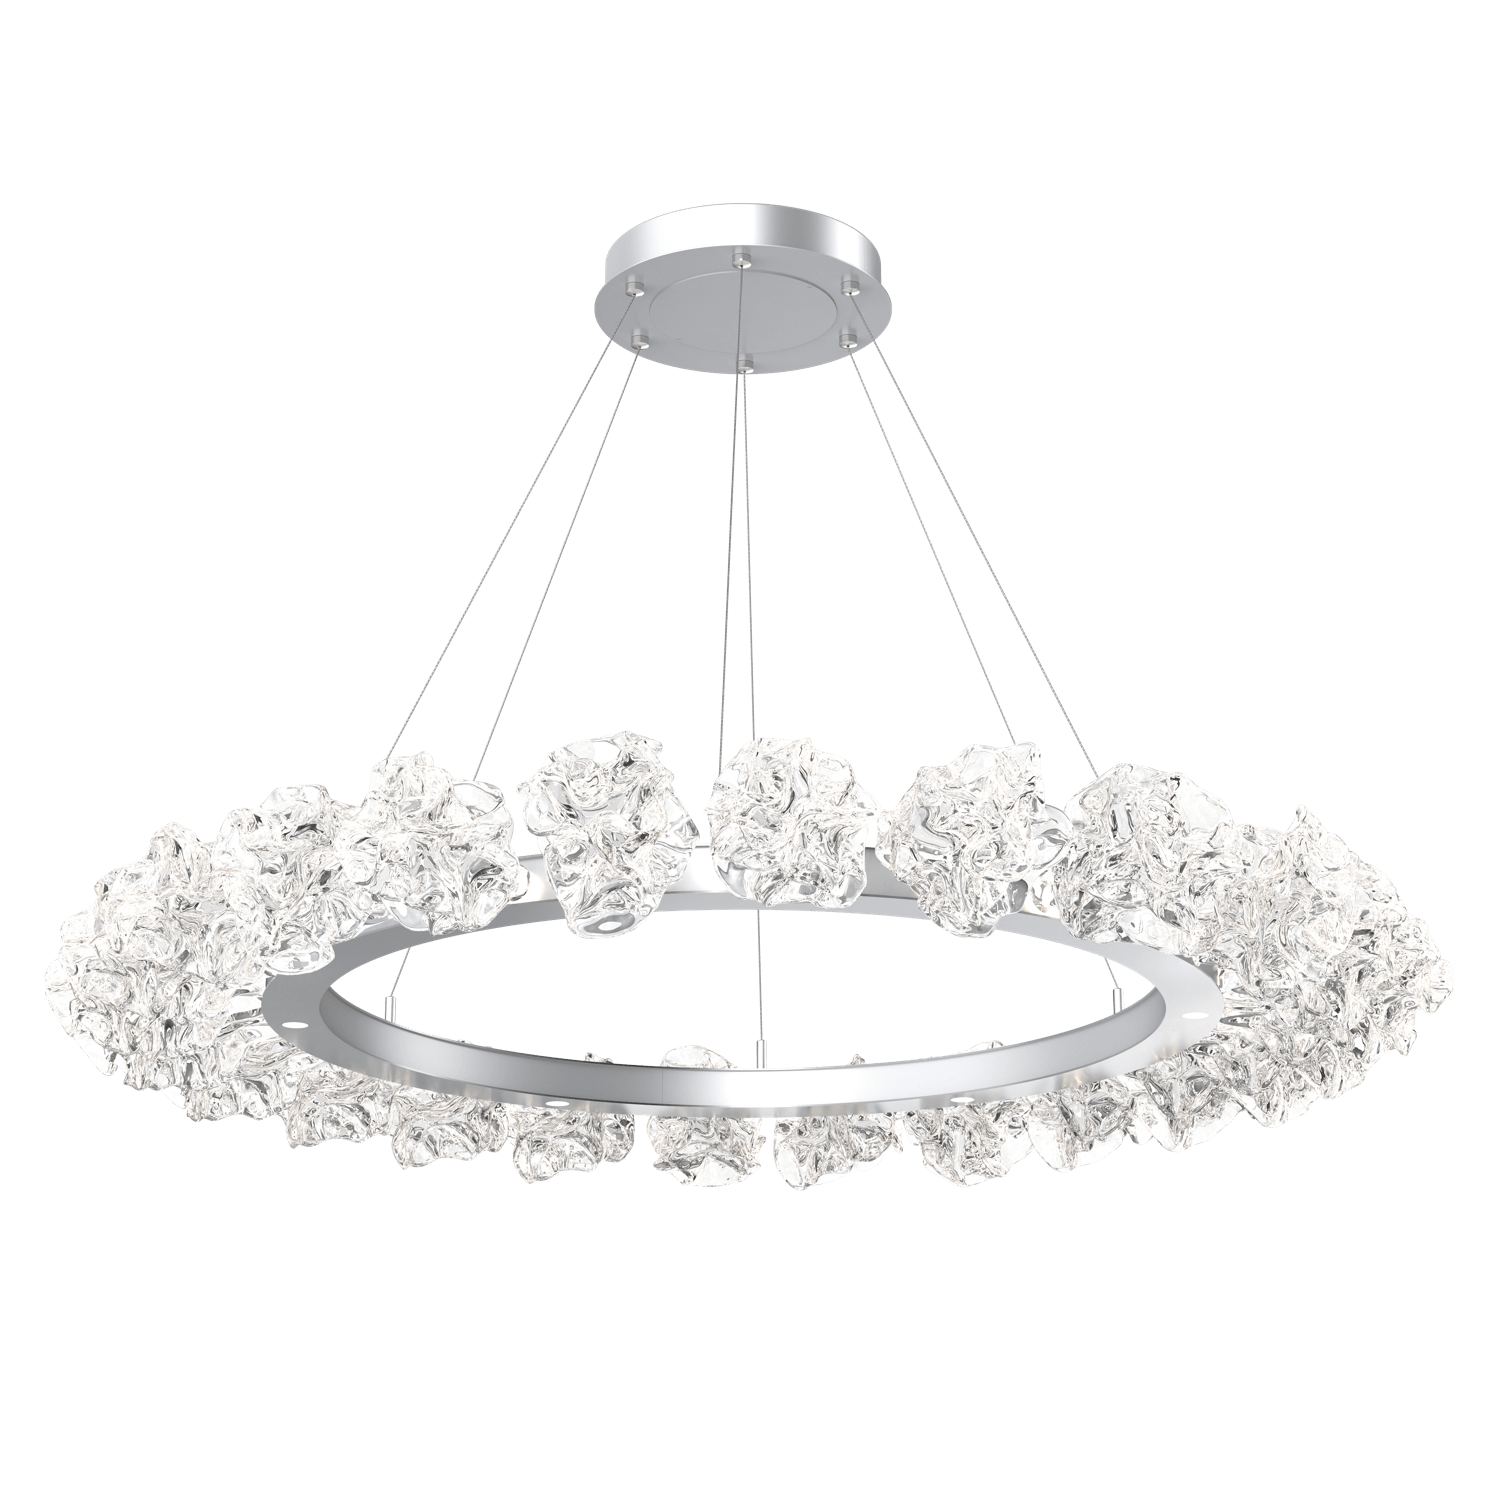 CHB0059-50-CS-Hammerton-Studio-Blossom-50-inch-radial-ring-chandelier-with-classic-silver-finish-and-clear-handblown-crystal-glass-shades-and-LED-lamping